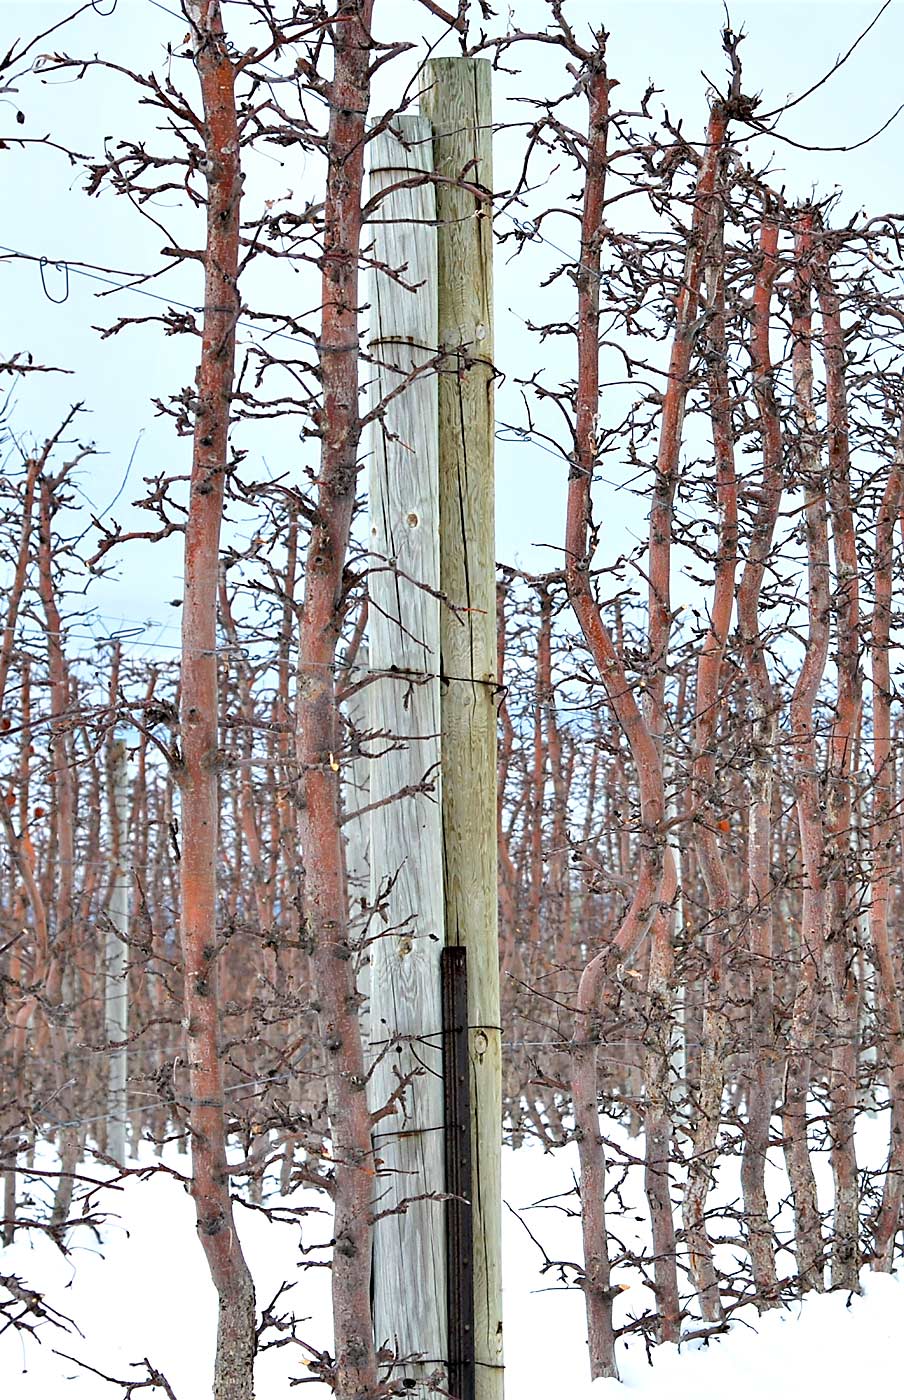 Rot problems with wood posts in blocks planted about a decade ago seem to be the factor that led to tornado vulnerability, Ferri said. He now regularly scouts for signs of rot and reinforces his super spindle systems with new posts as needed. (Courtesy Tom Ferri)